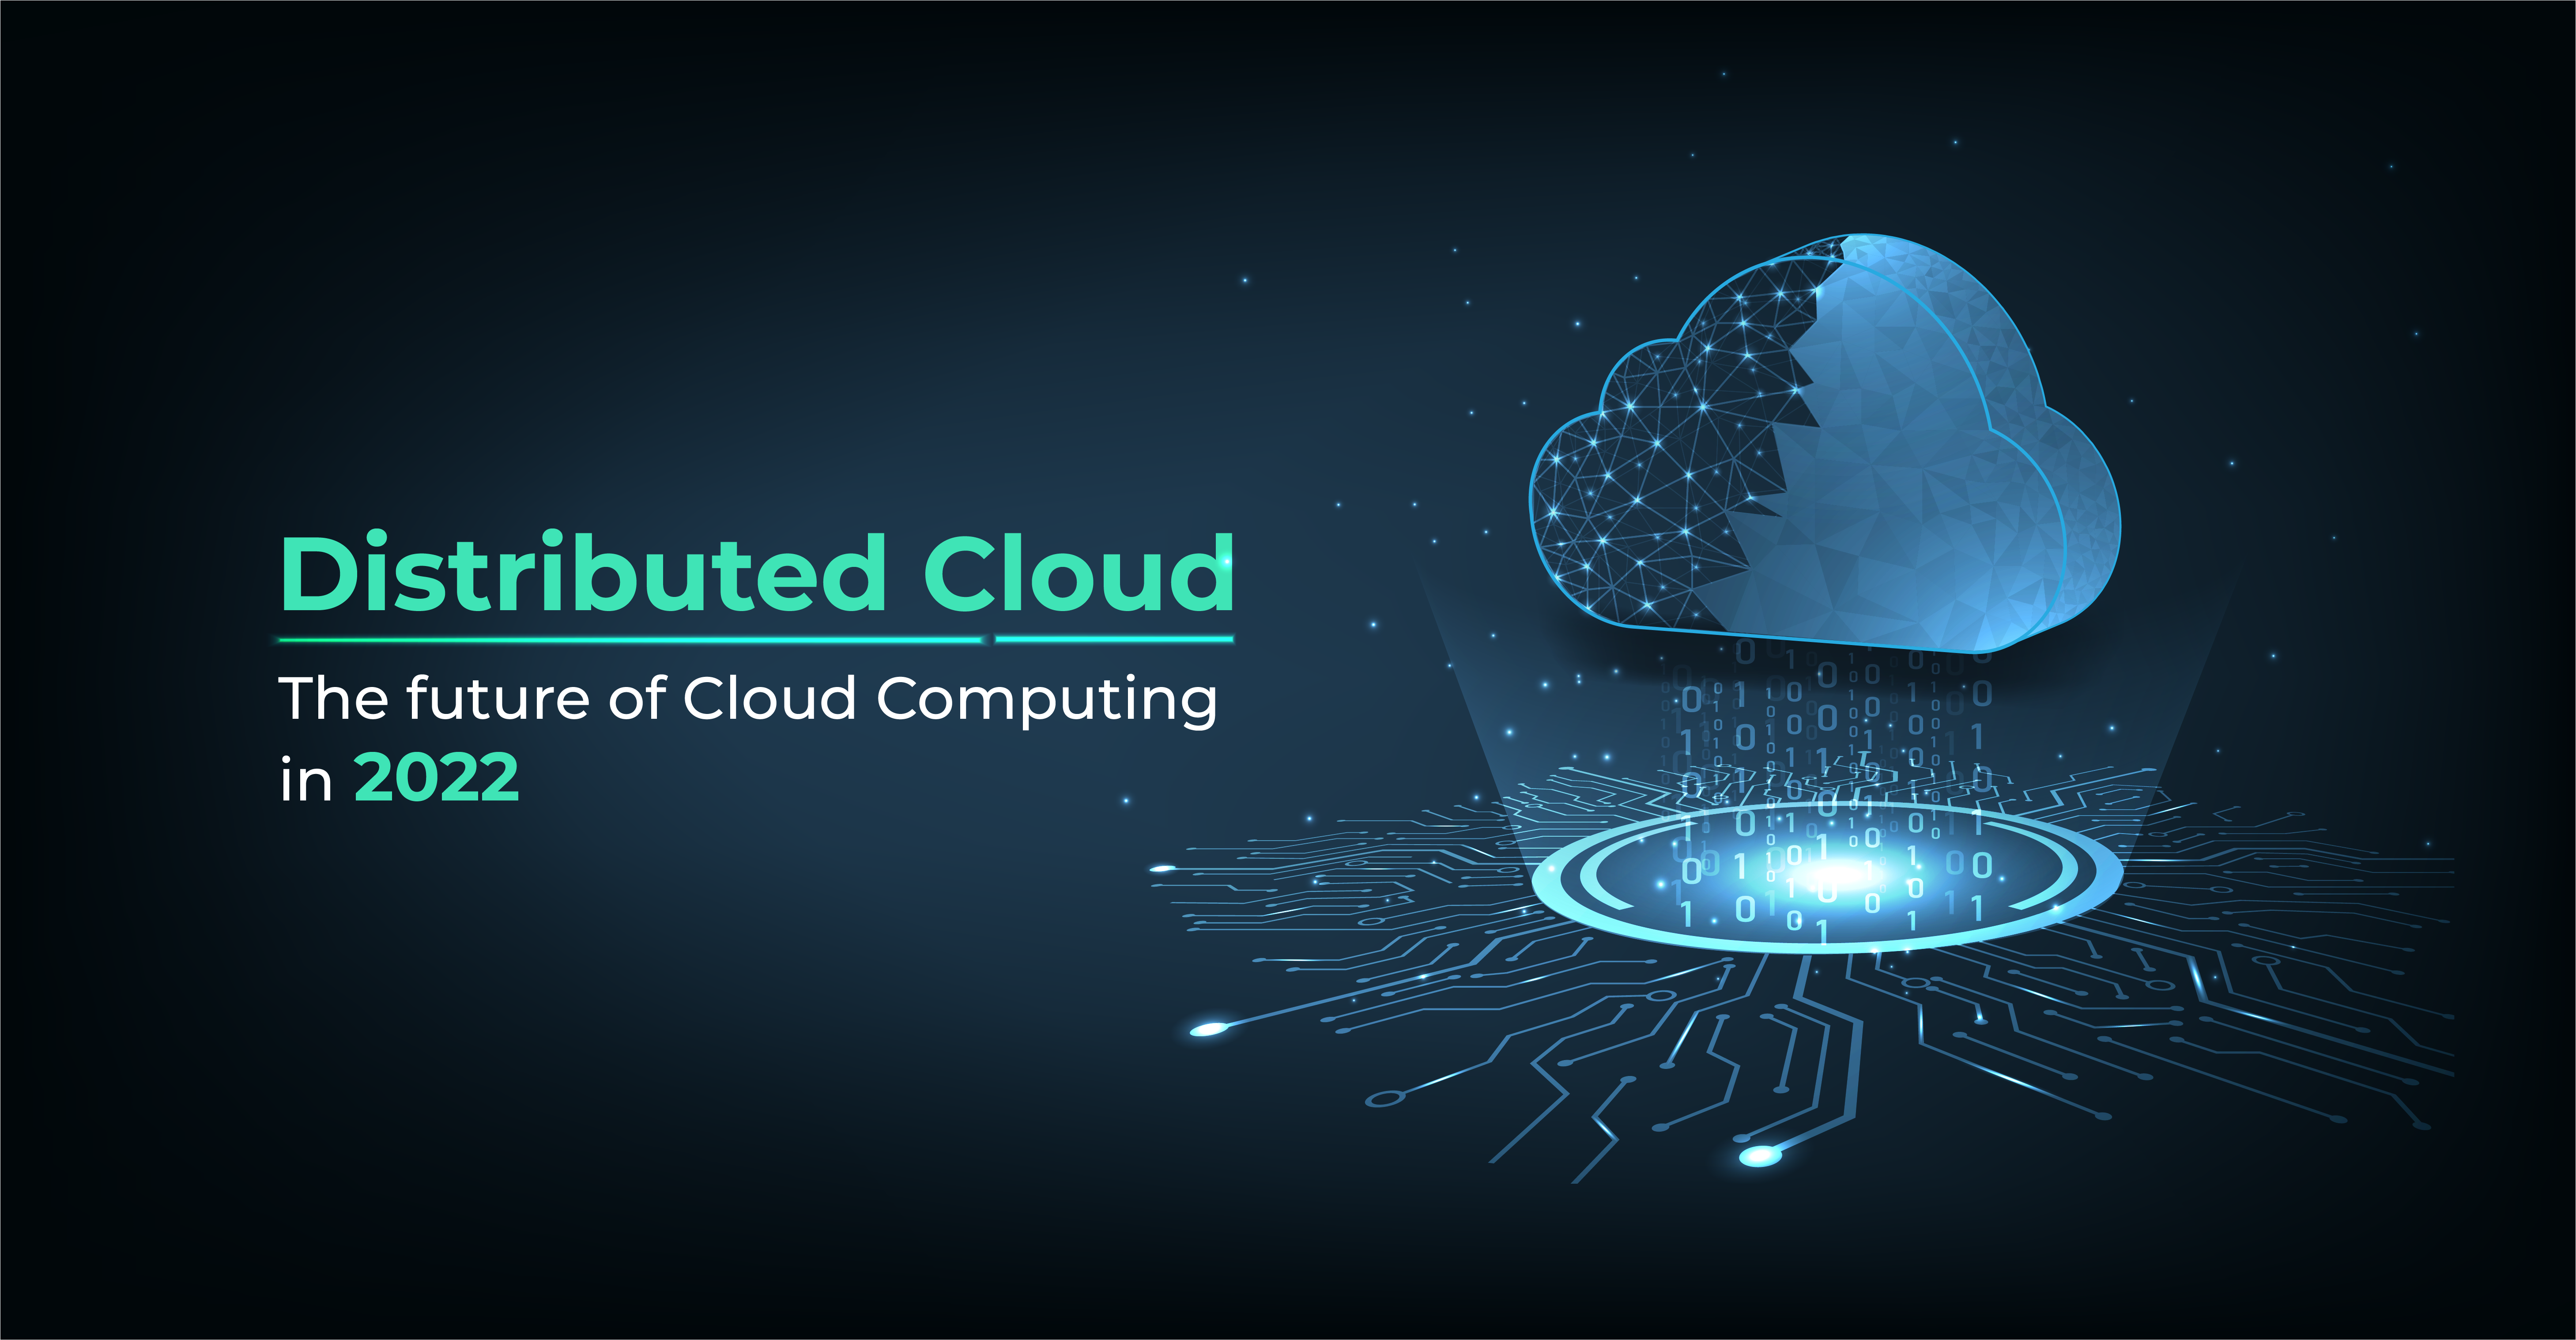 Distributed Cloud: The future of Cloud Computing in 2022